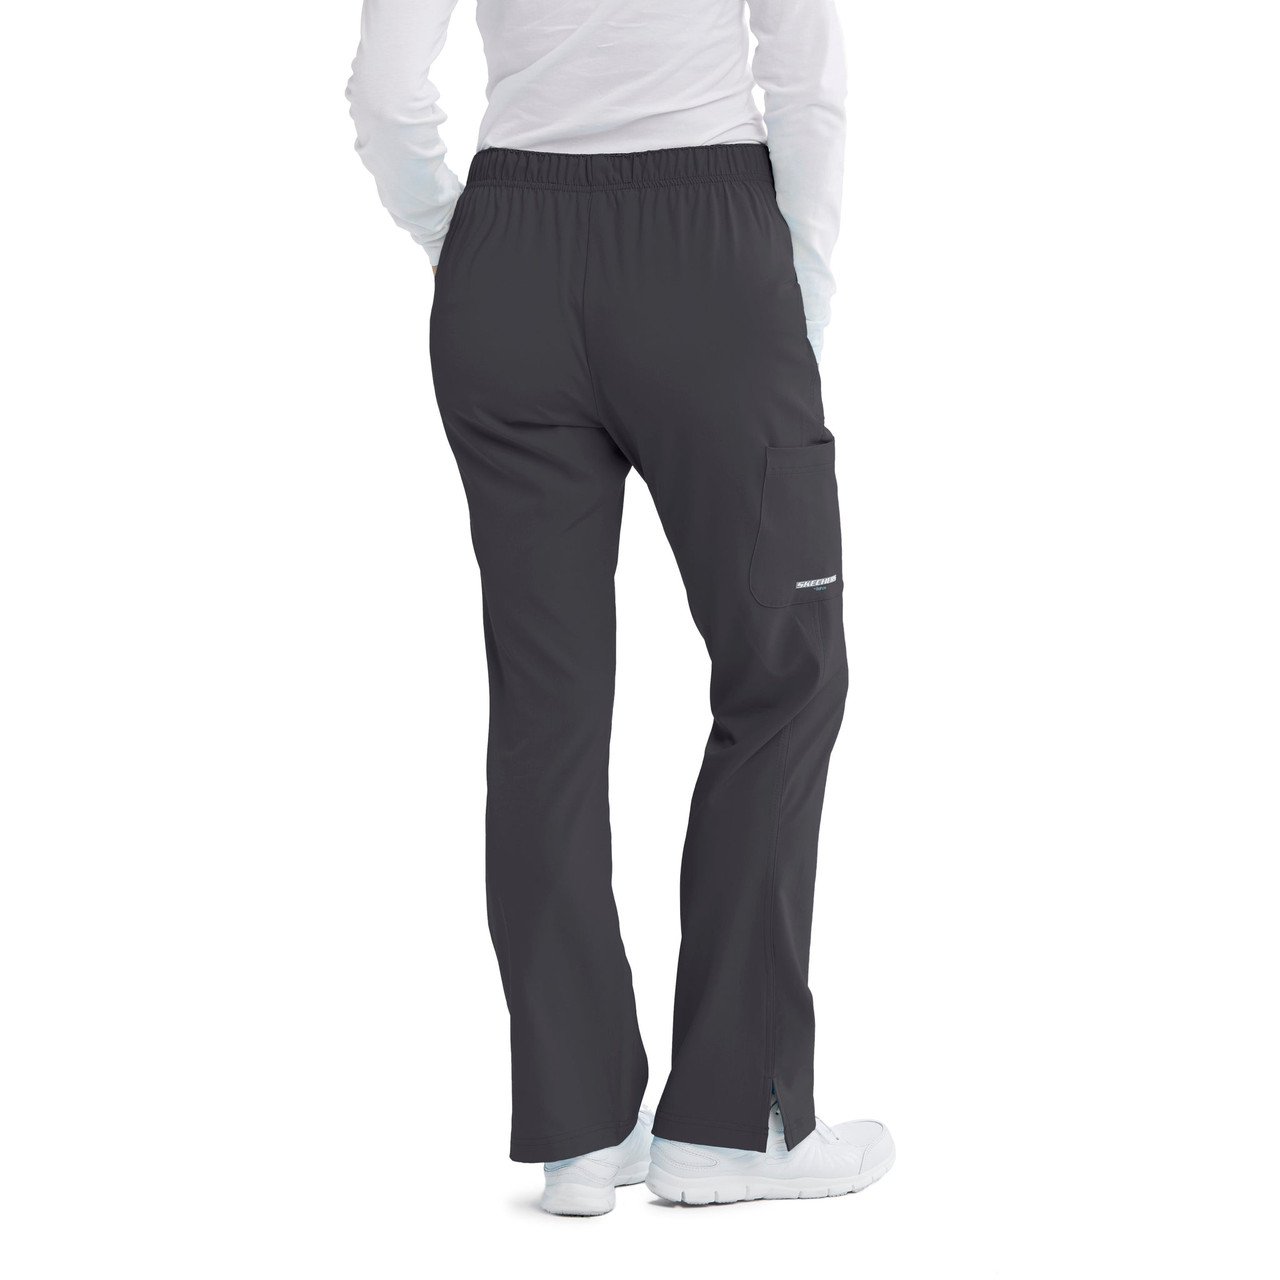 Skechers Reliance Mid-Rise Cargo Pant